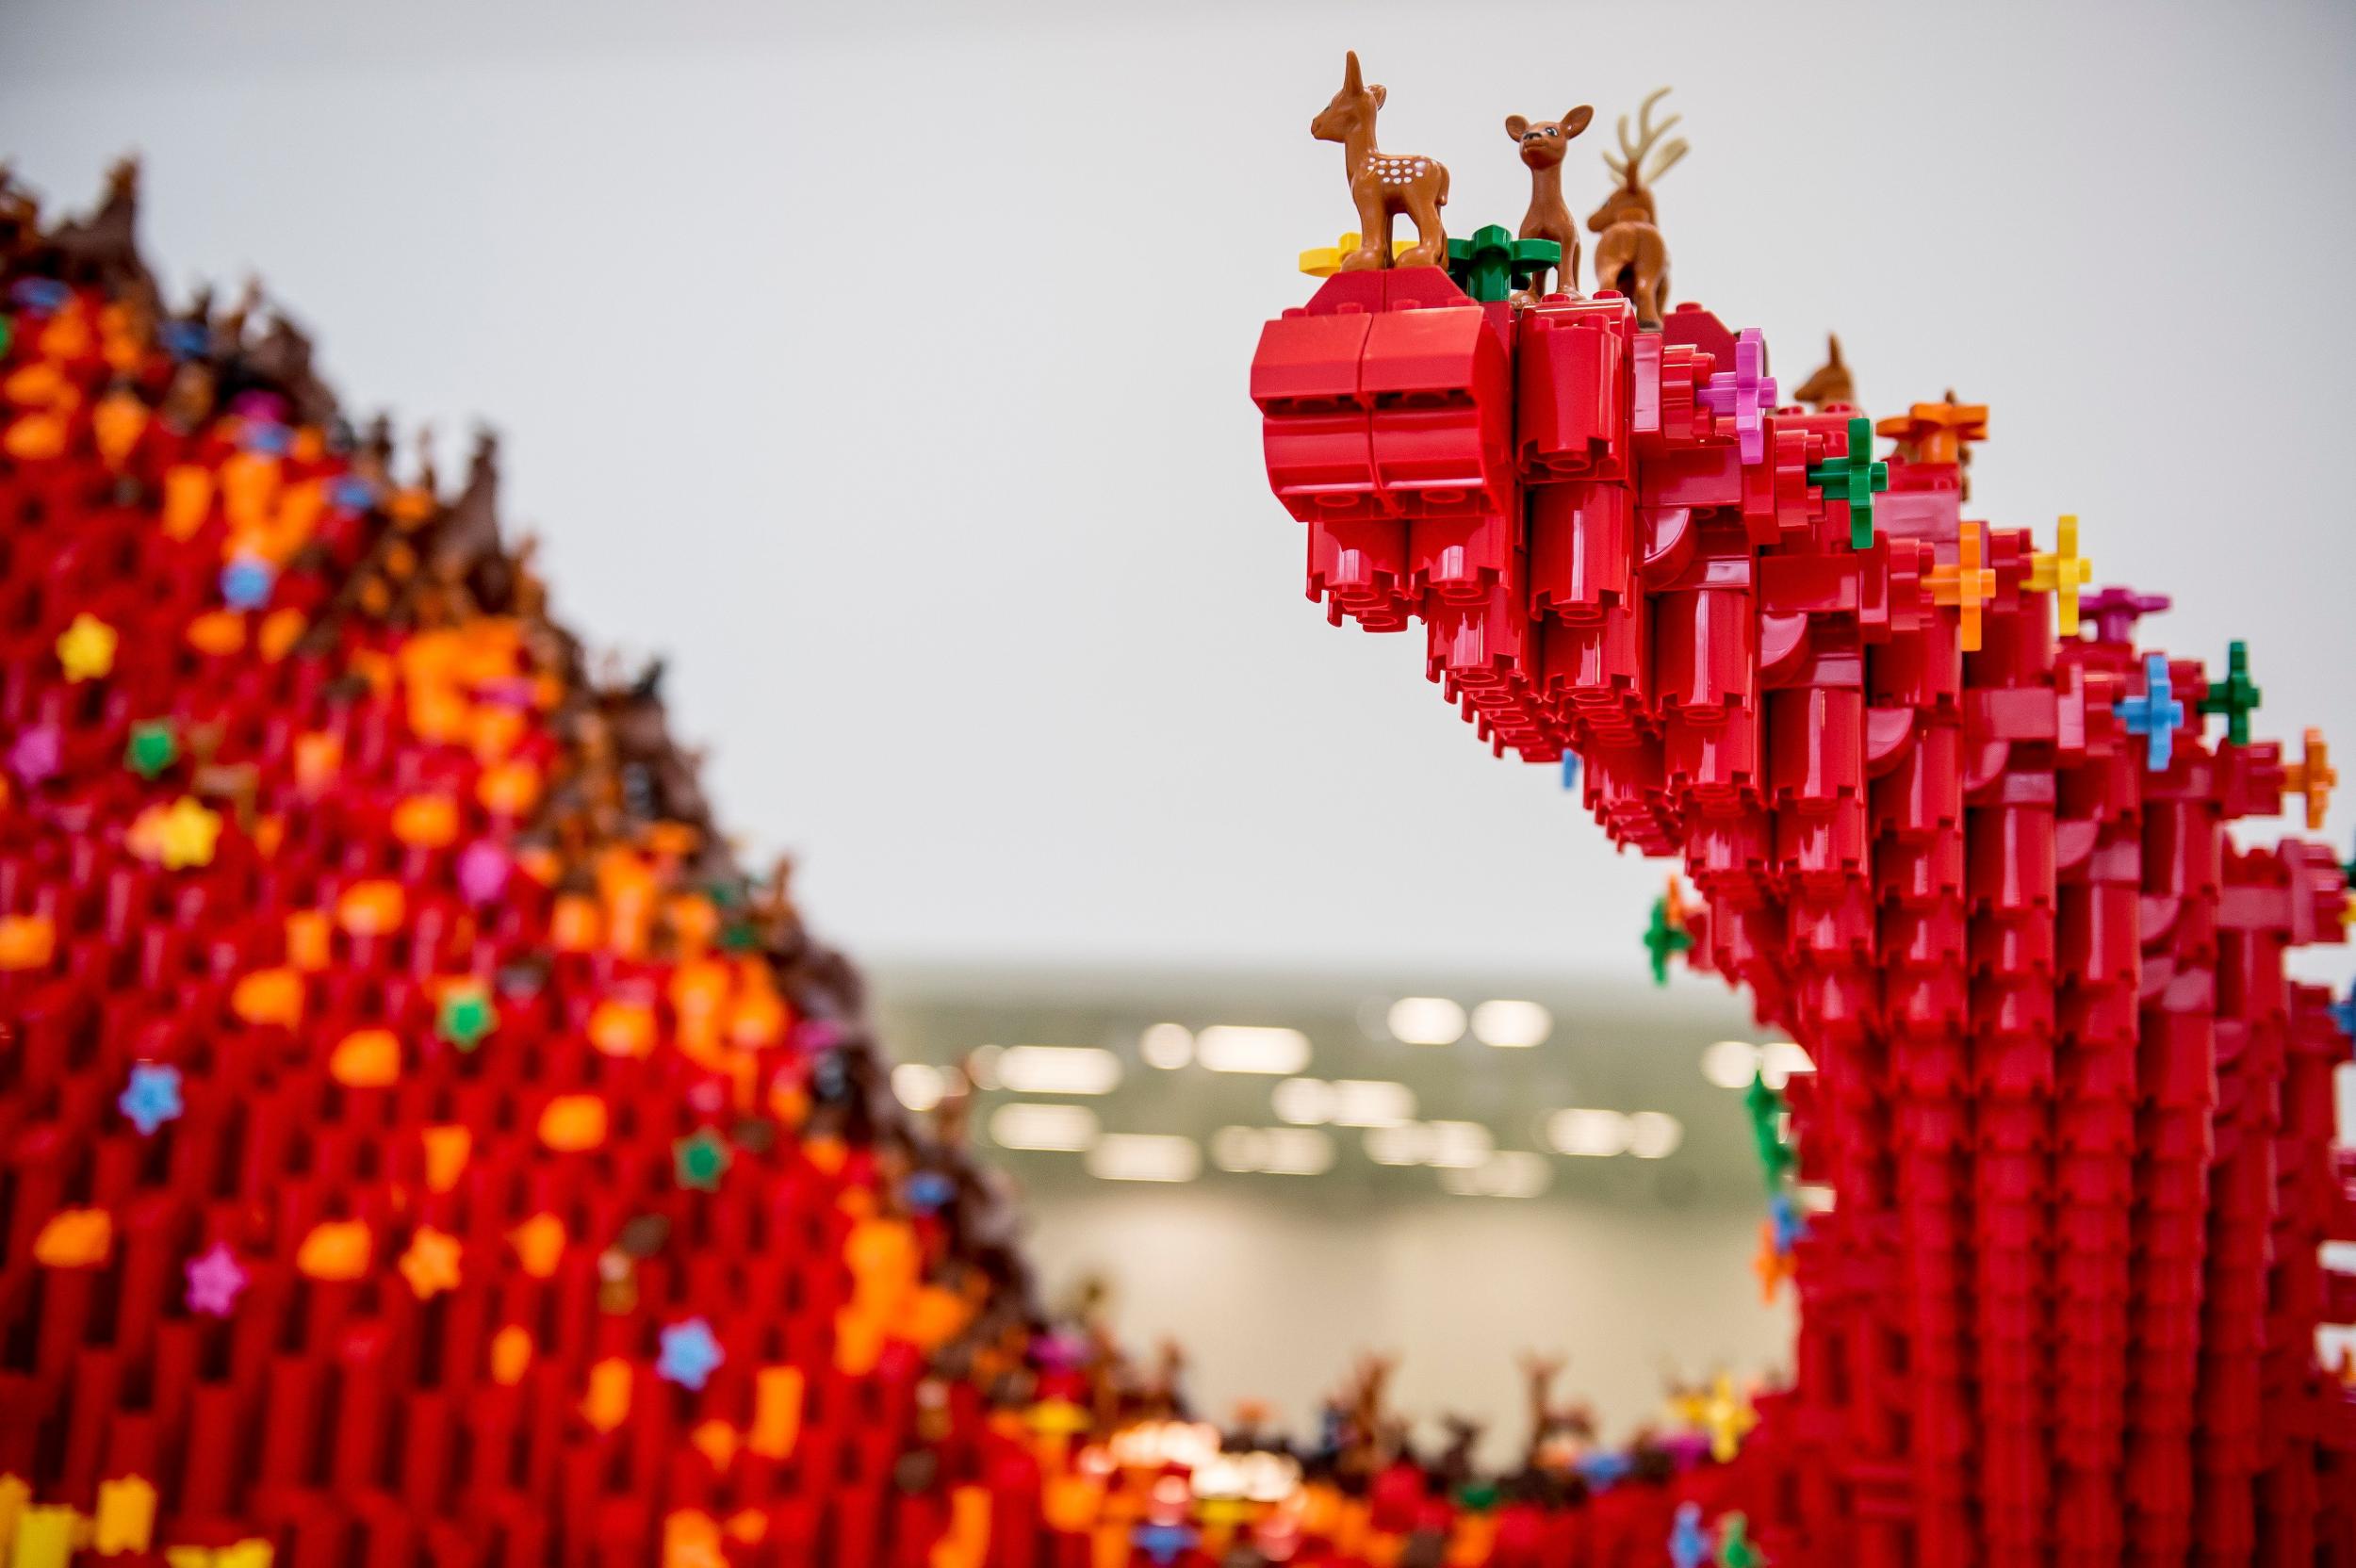 U9 Japanese Junior Idols - Lego sales fall for first time since 2004 | The Independent